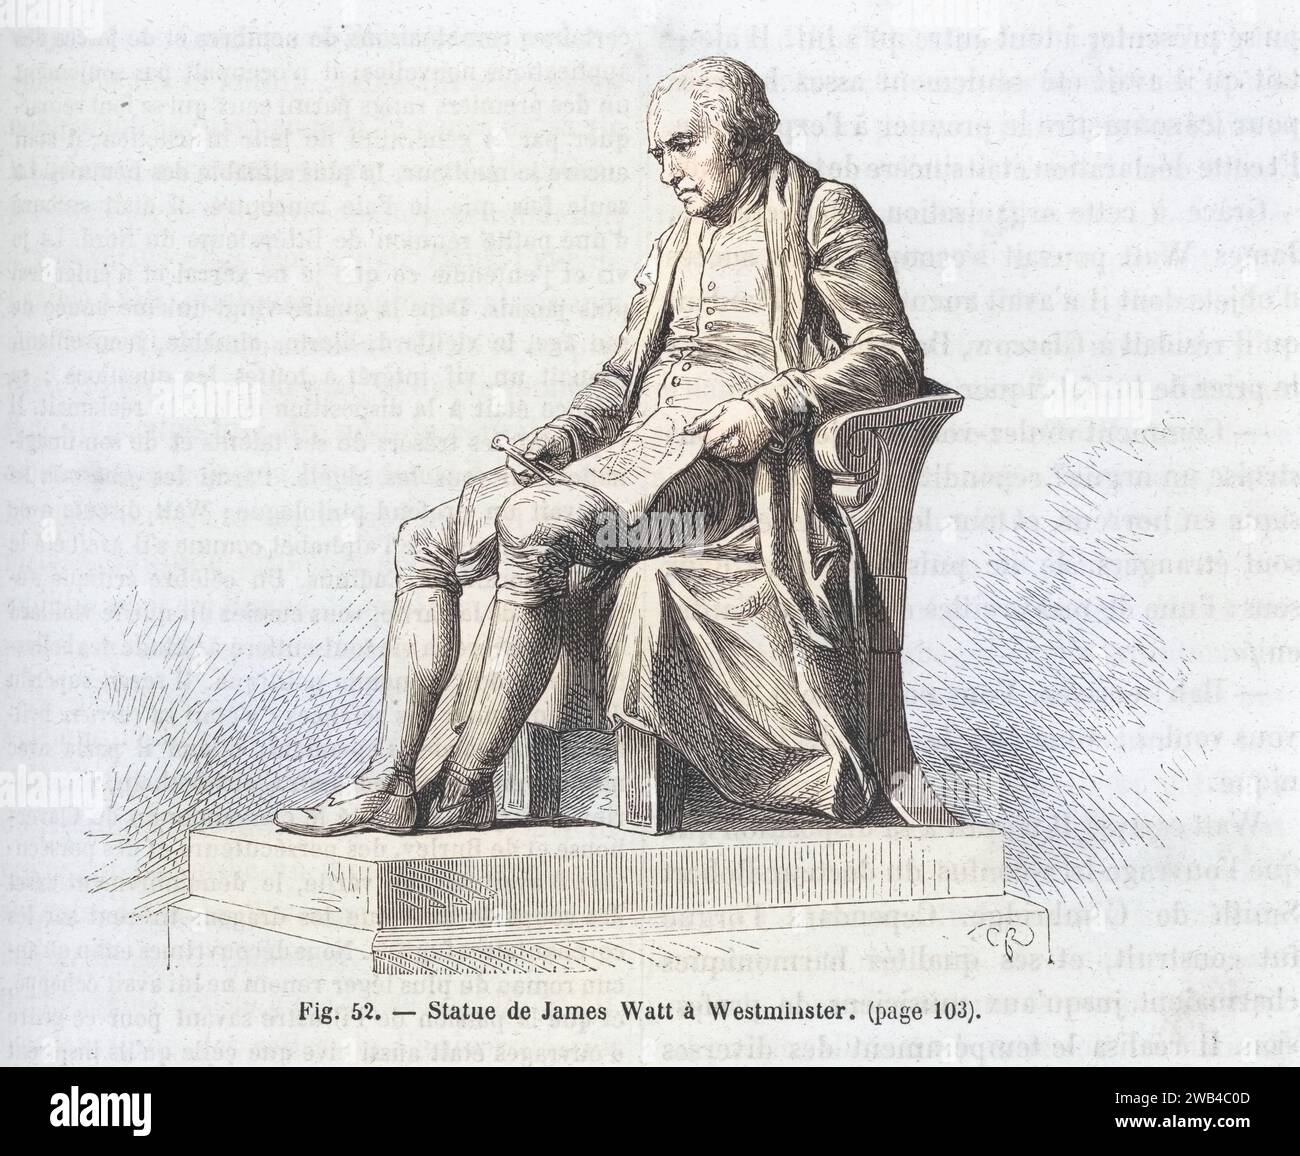 Statue of the Scottish engineer James Watt in Westminster (18th century).  Illustration from 'Les Merveilles de la science ou description populaire des inventions modernes' written by Louis Figuier and published in 1867 by Furne, Jouvet et Cie. Stock Photo